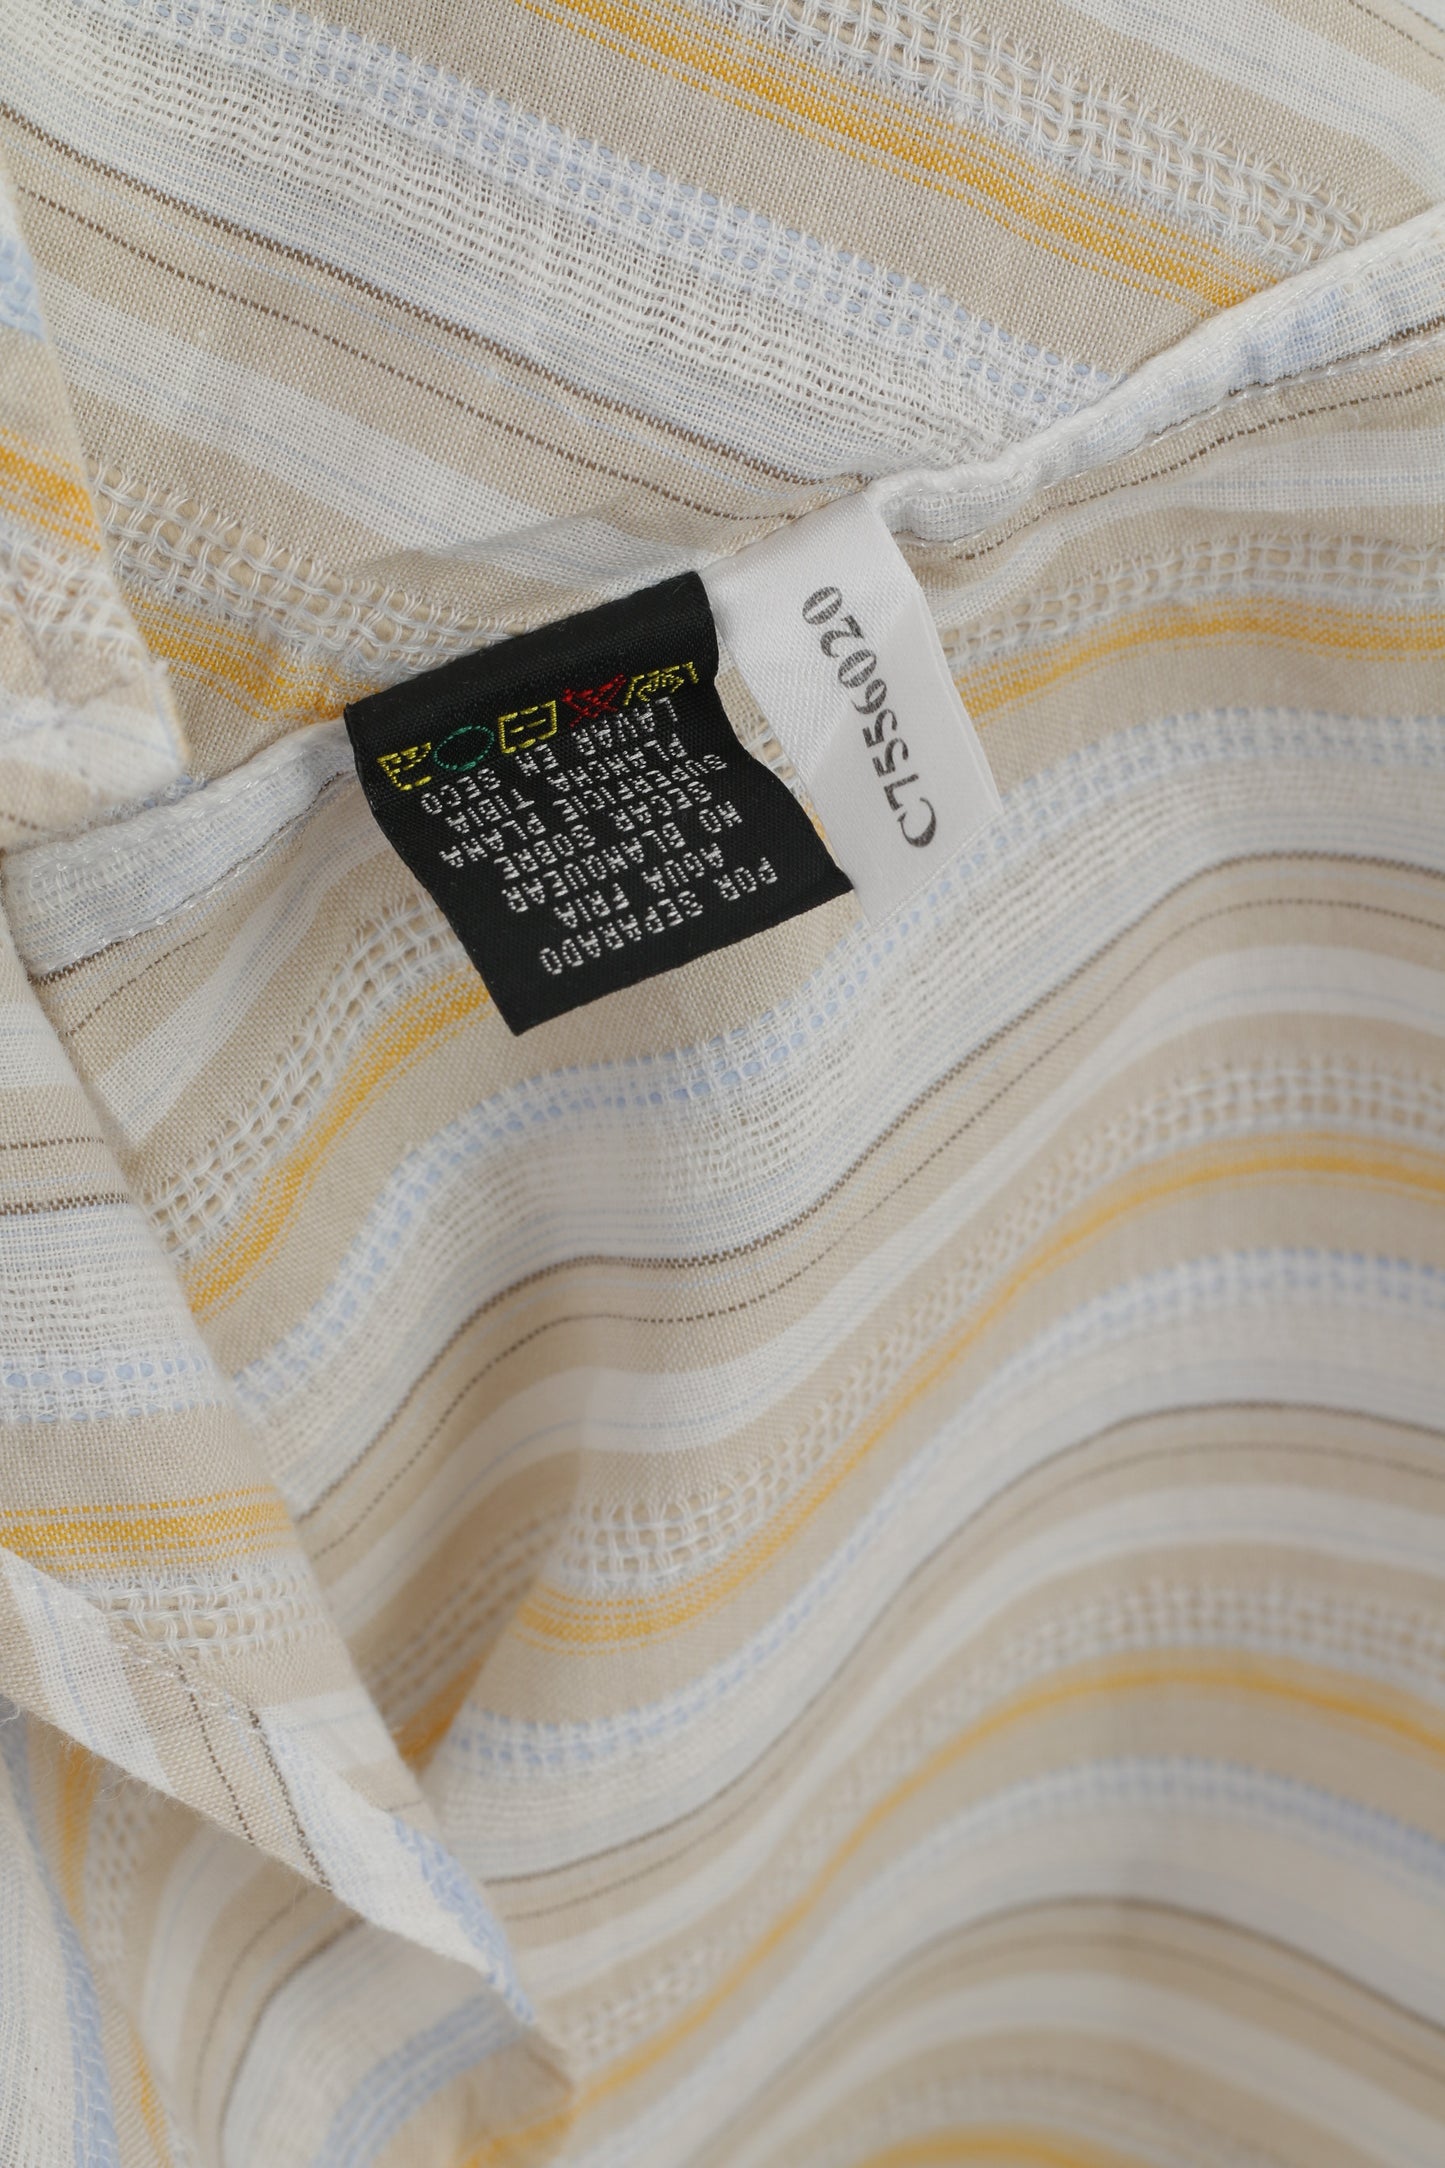 Kenneth Cole Men XL Casual Shirt Beige Striped Cotton Short Sleeeve Top